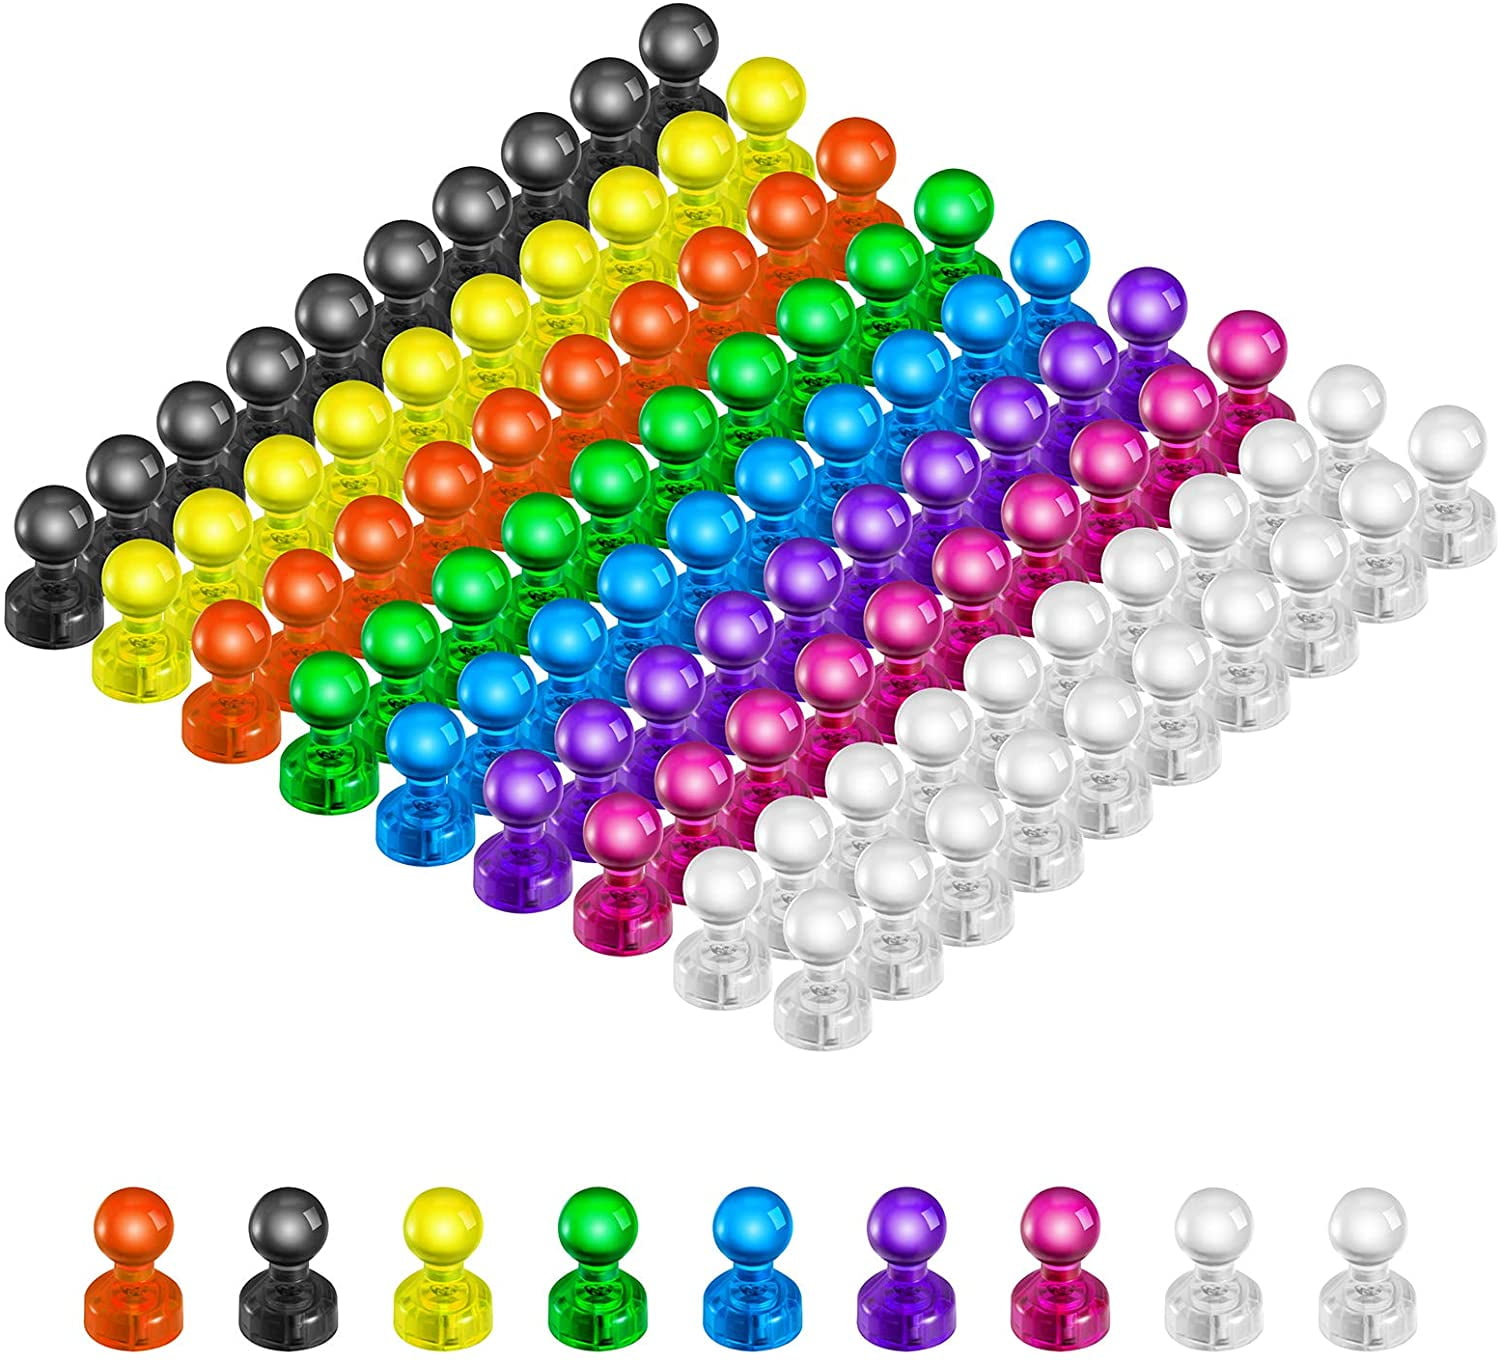 GIXUSIL 50 Colorful Push Pin Magnets | Strong Magnetic Push Pins | Perfect  to Use as Refrigerator Magnets, Whiteboard Magnets, Map Magnets, Calendar